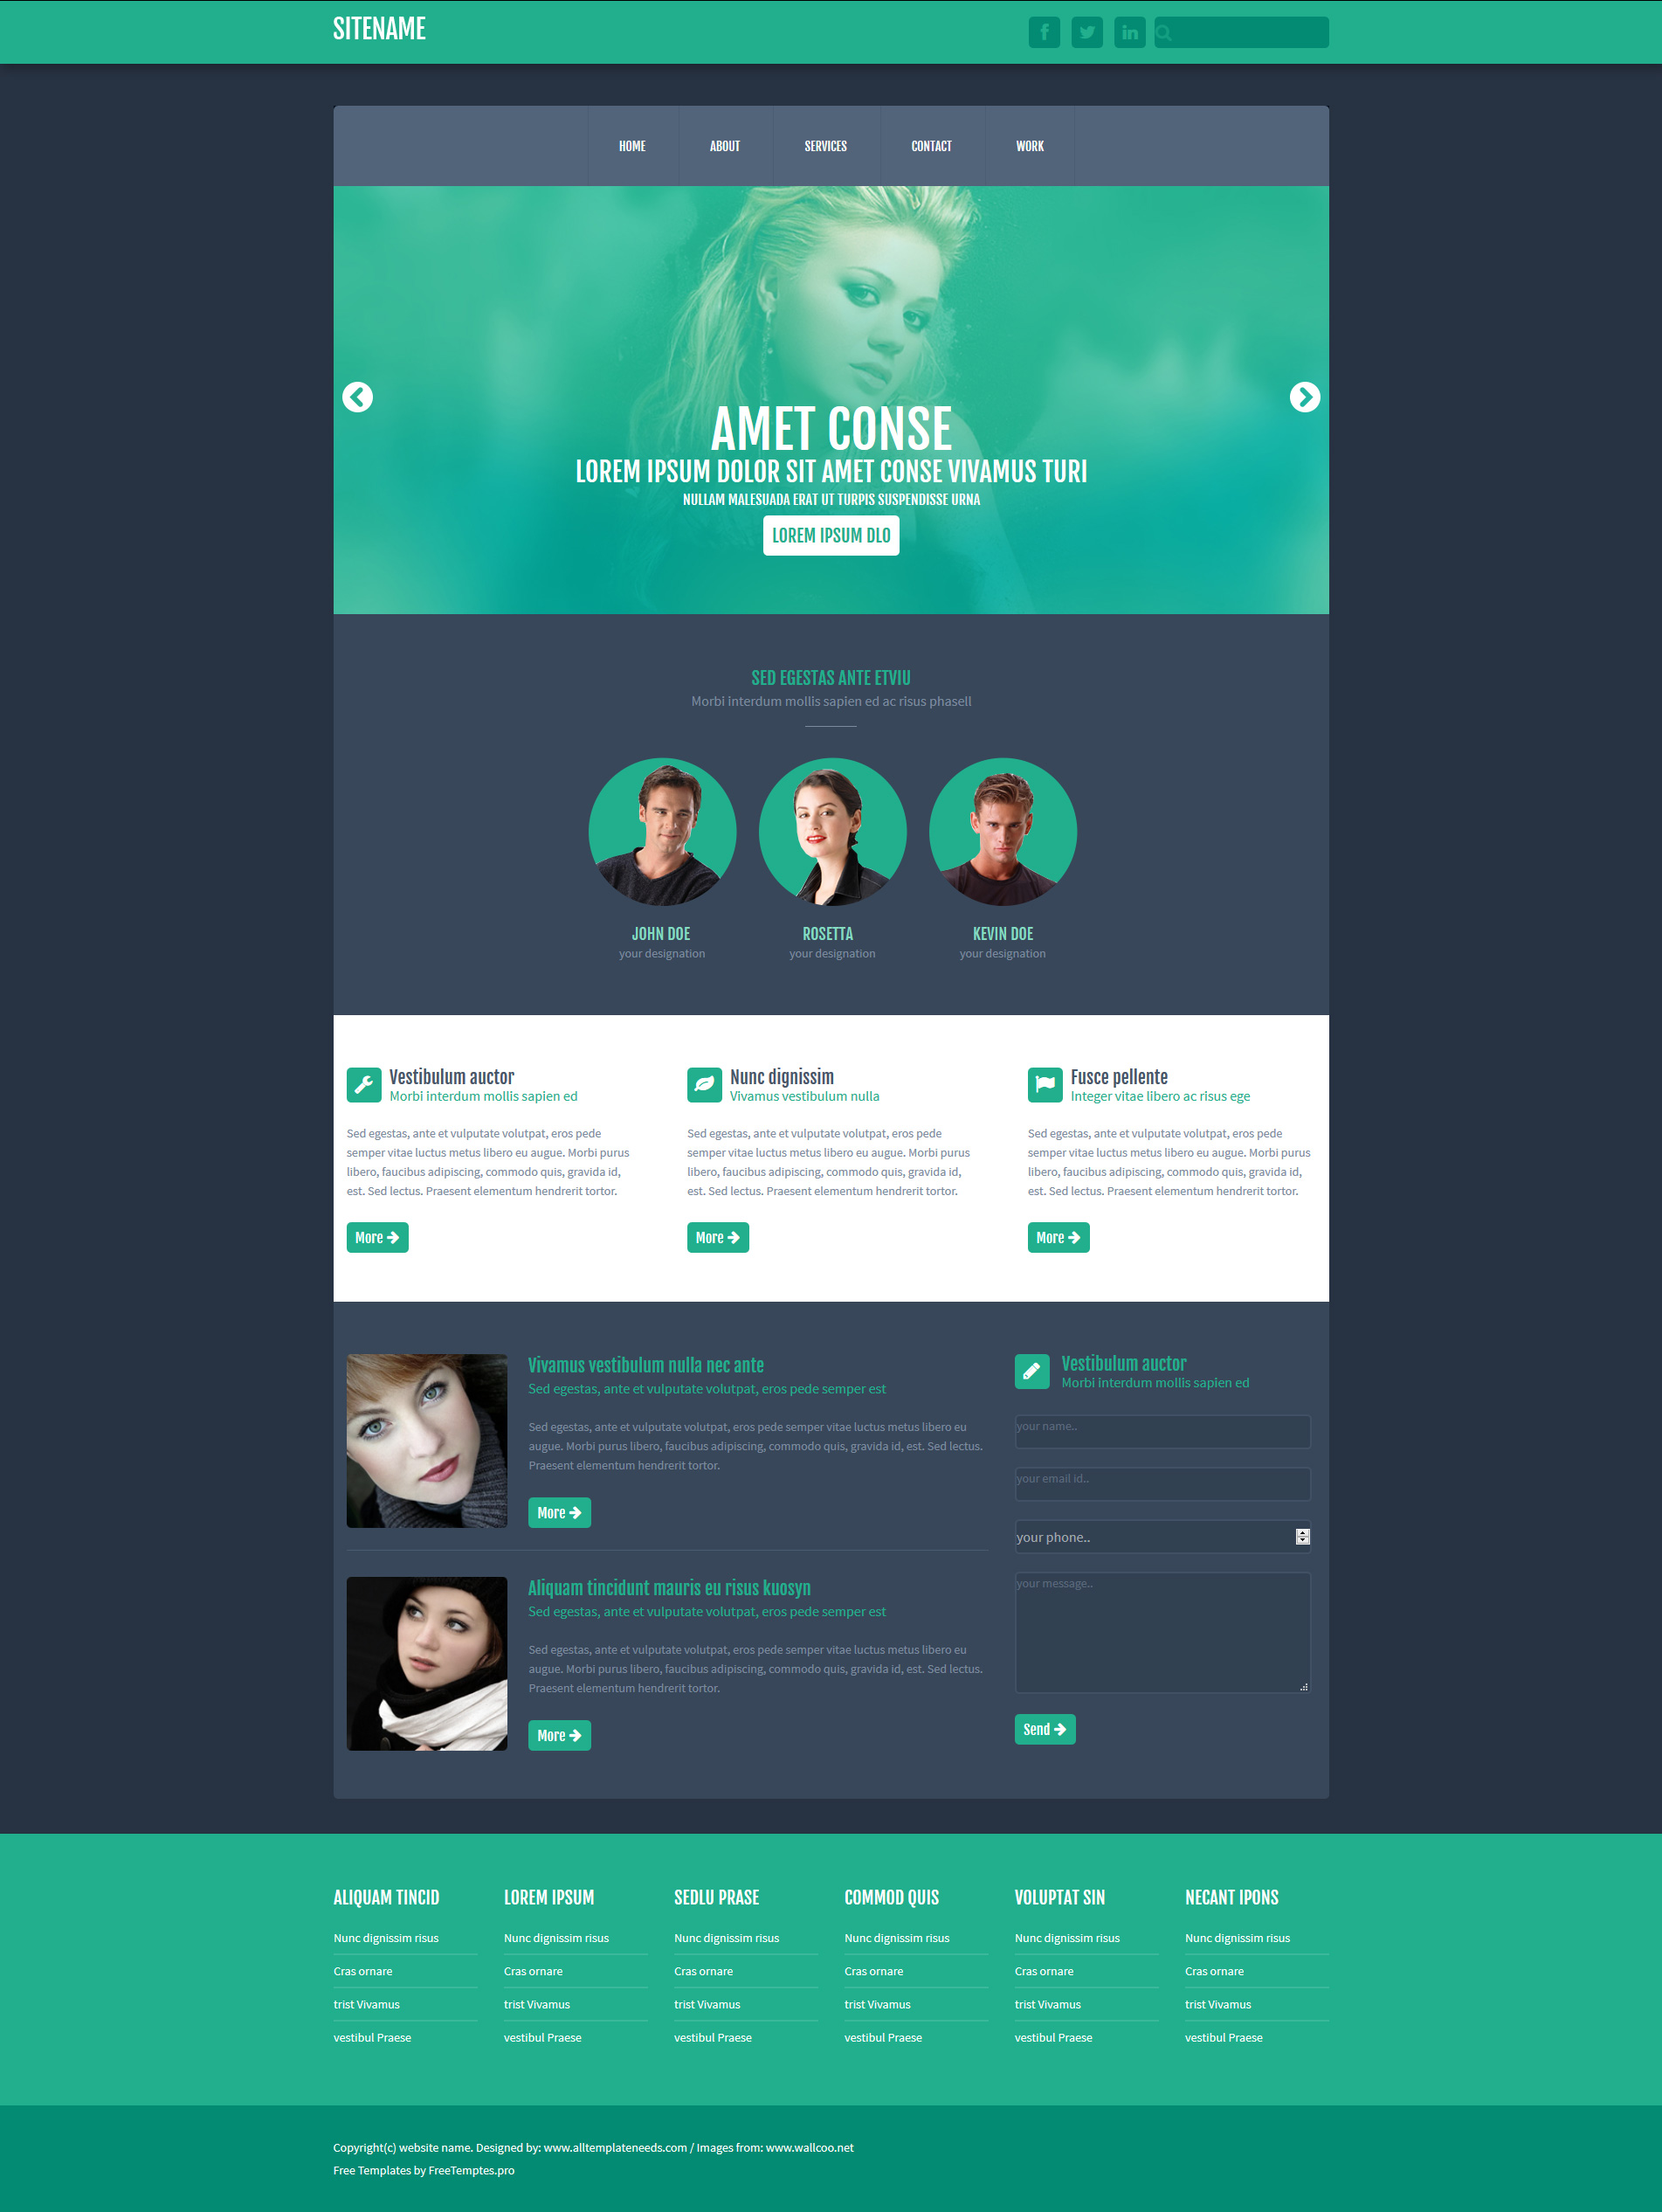 Free One Page Website HTML Template